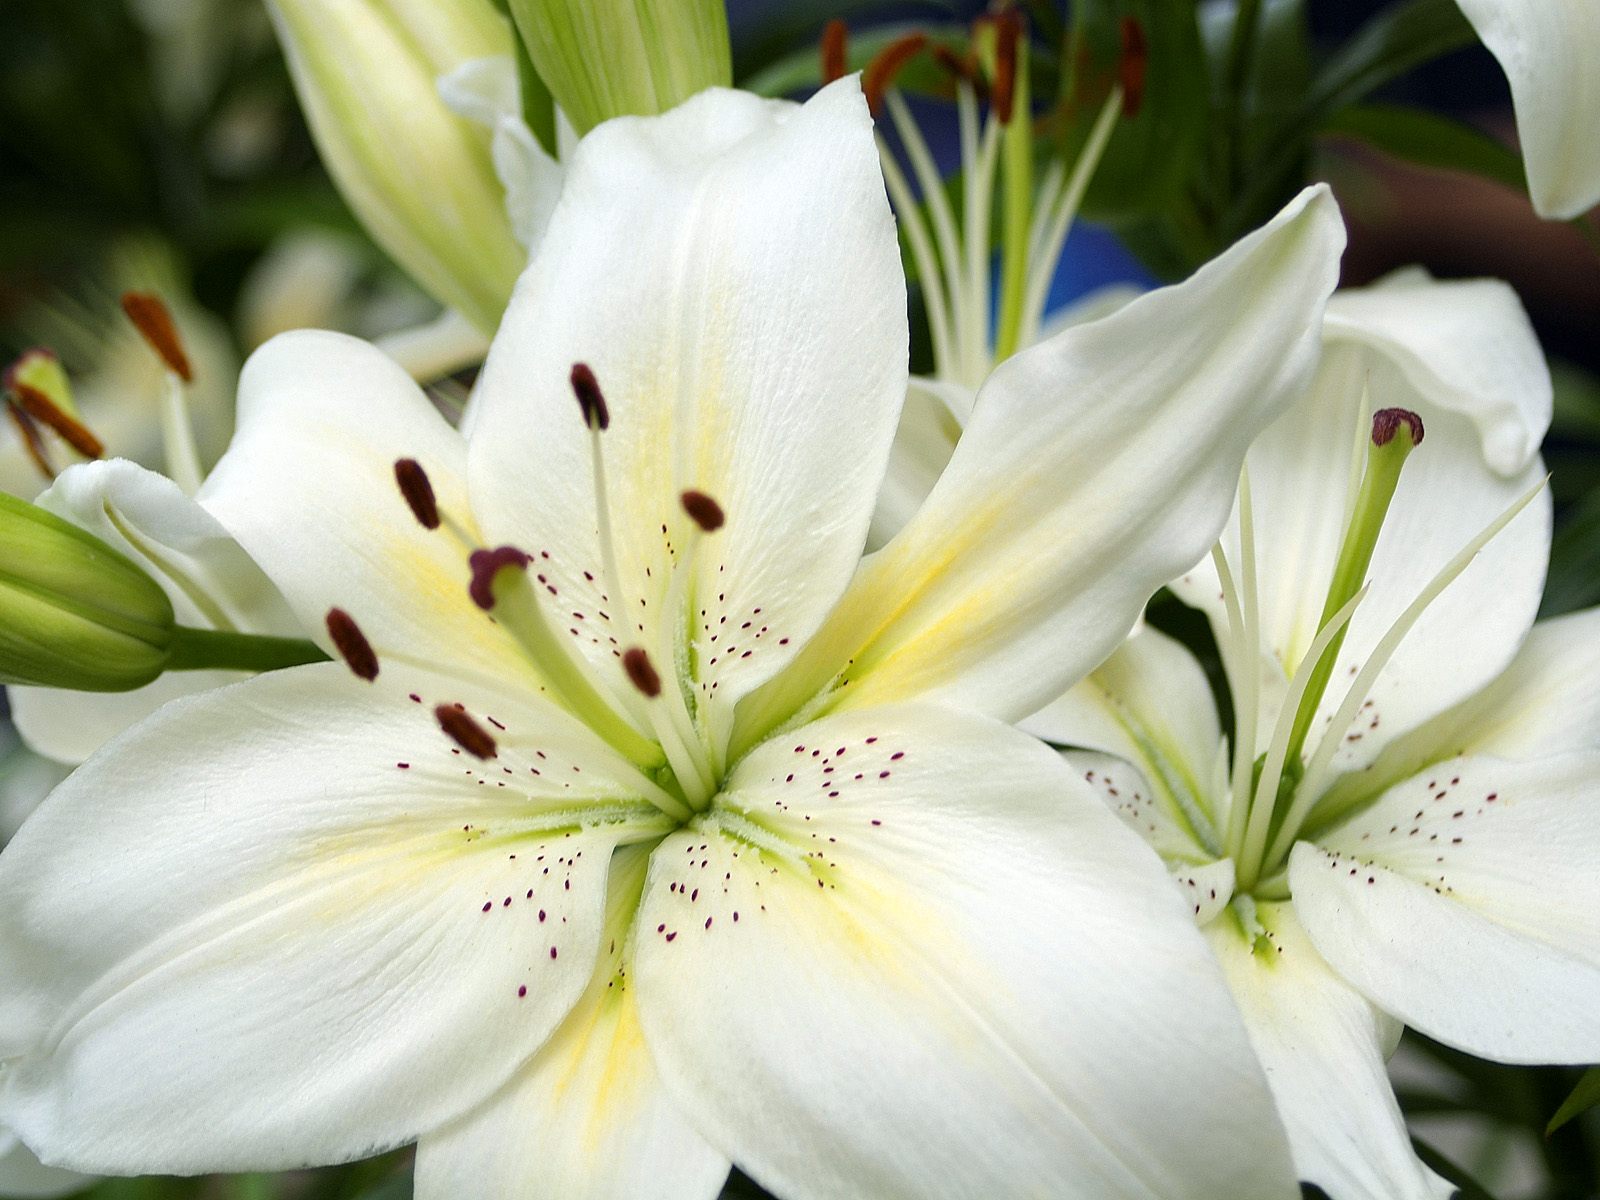 White Lily Oil - Recipe and Therapeutic Uses